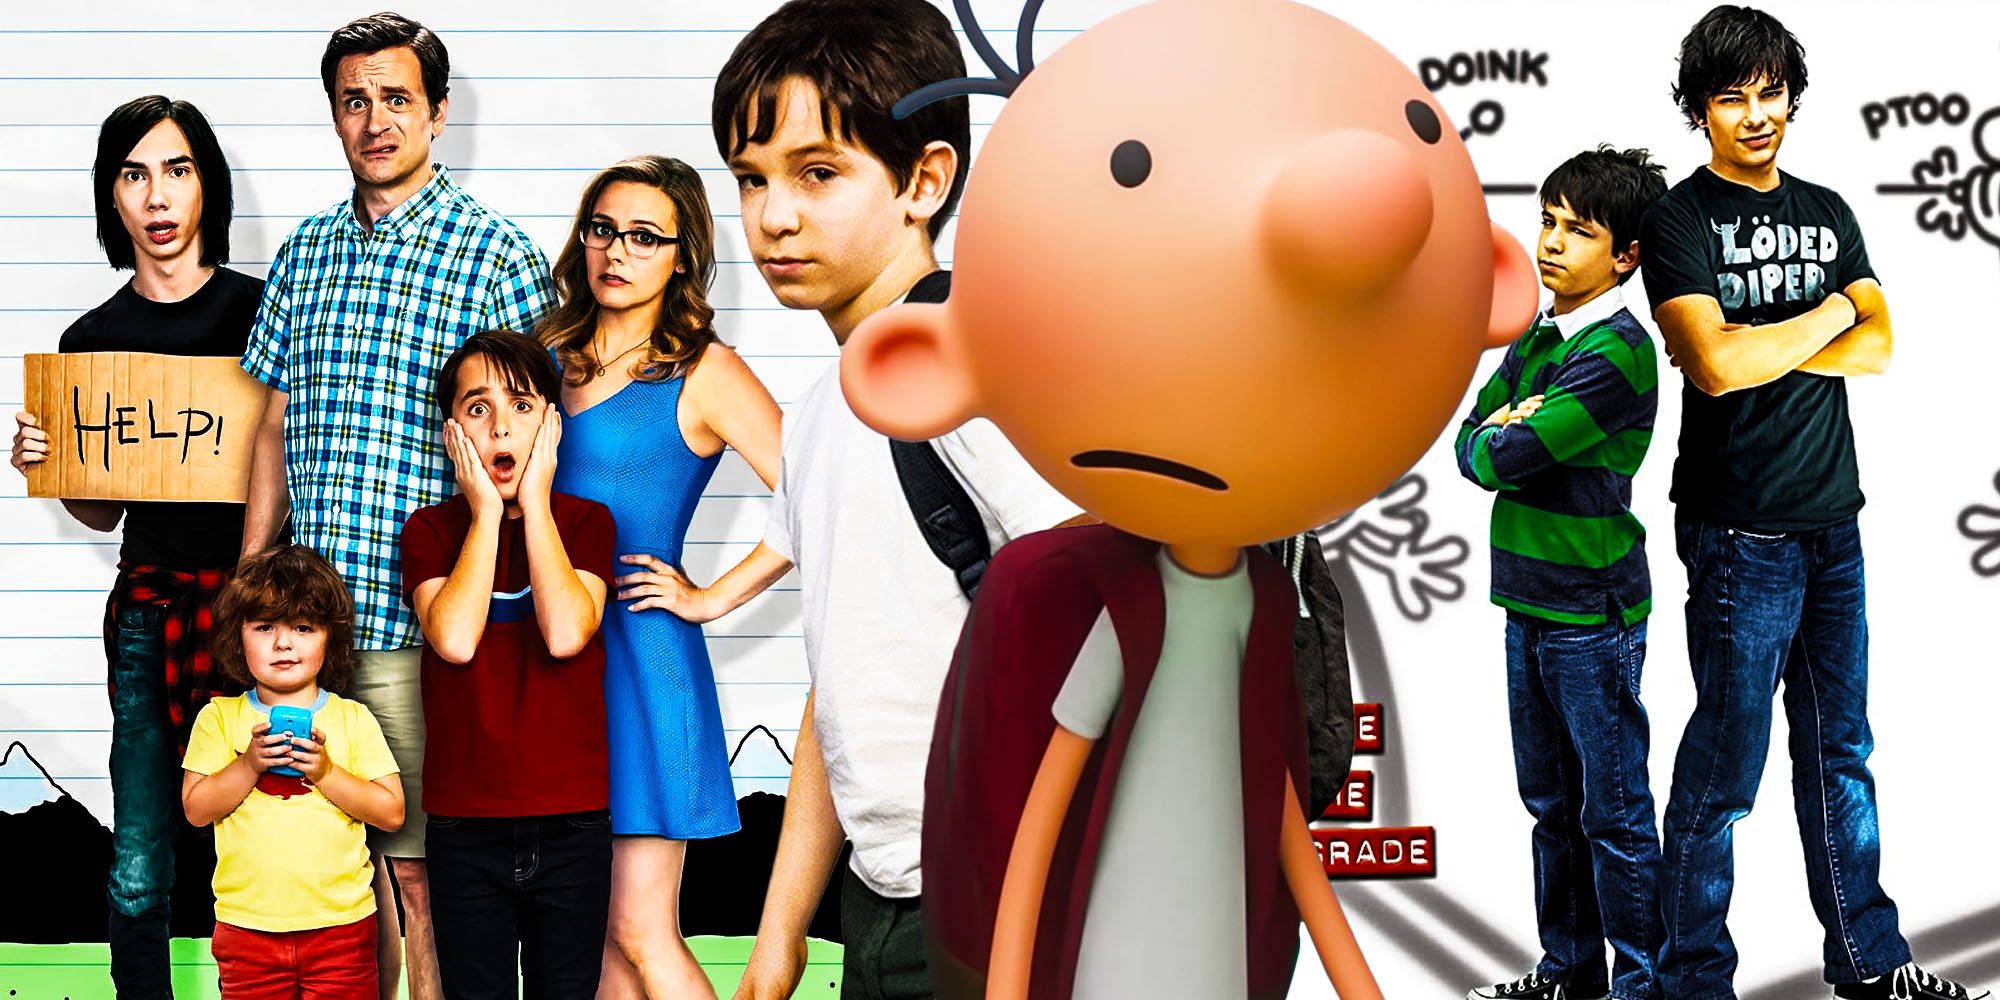 Every Diary of a Wimpy Kid Movie Ranked (Including 2021 Disney+ Reboot)